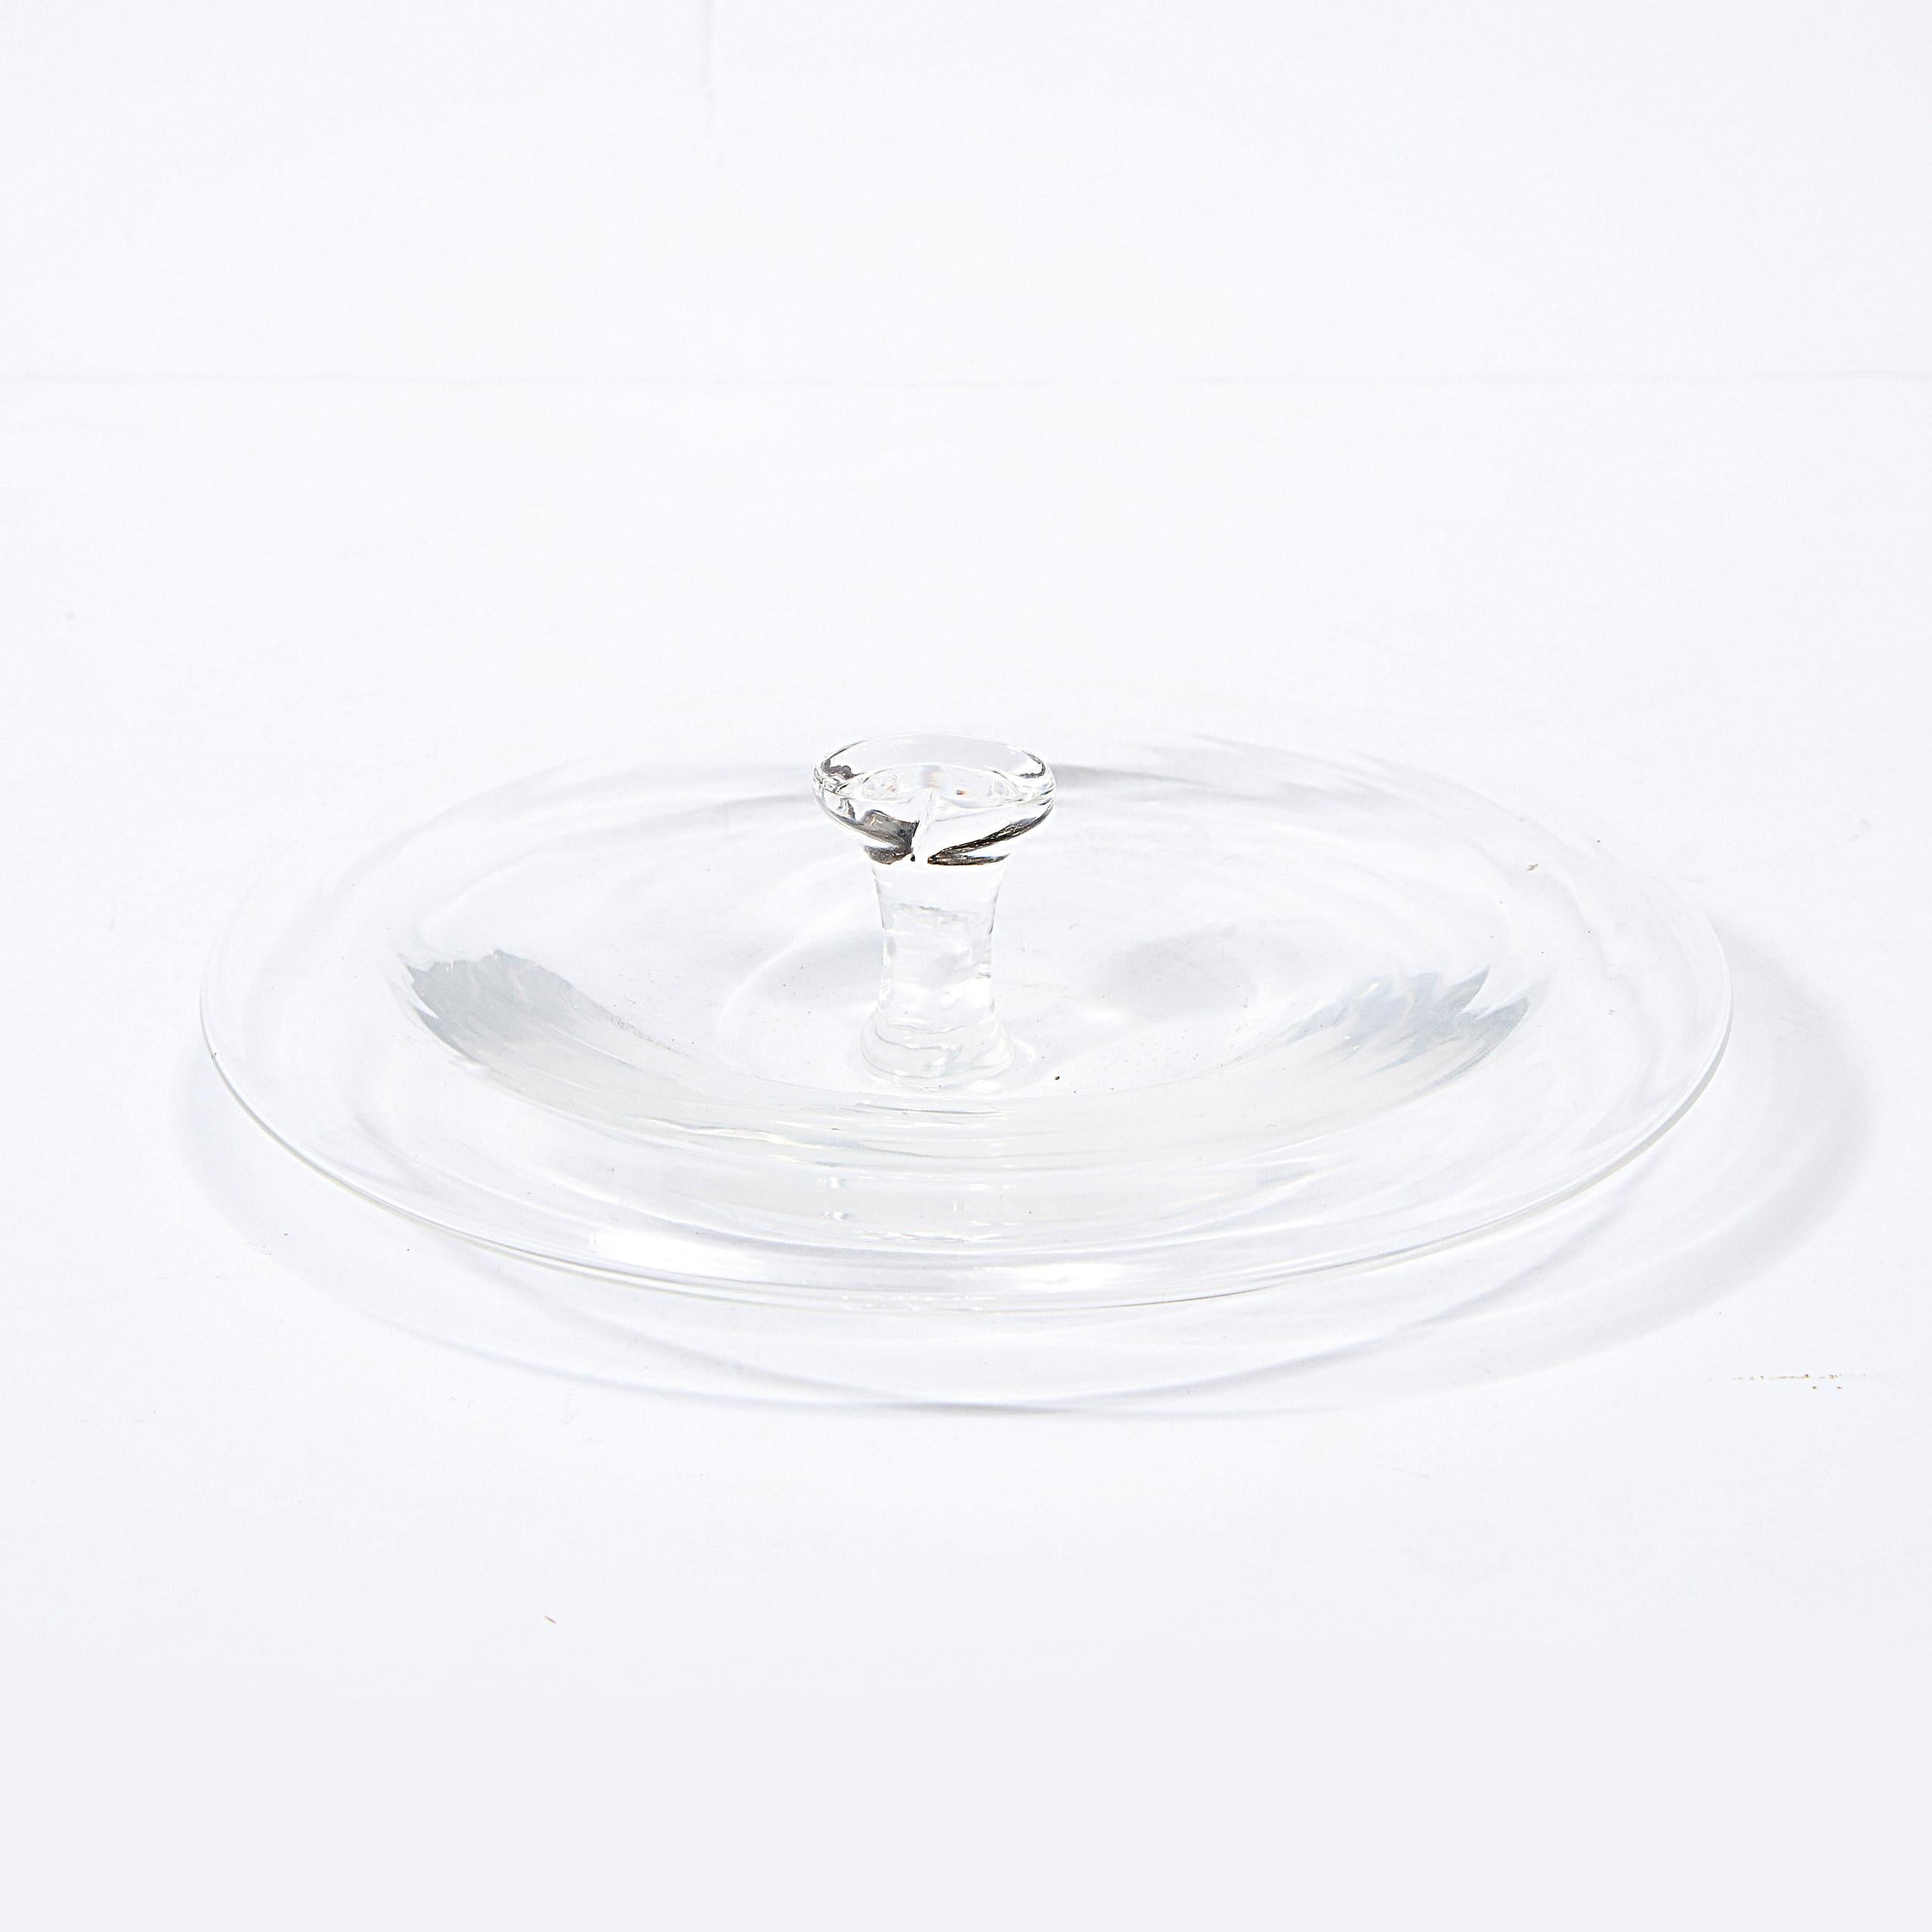 Part of Elsa Peretti iconic Thumbprint collection for Tiffany & Co, this translucent glass decorative dish/ ash tray was designed in 1978, and executed shortly thereafter. Peretti, an Italian fashion model, turned designer and philanthropist started